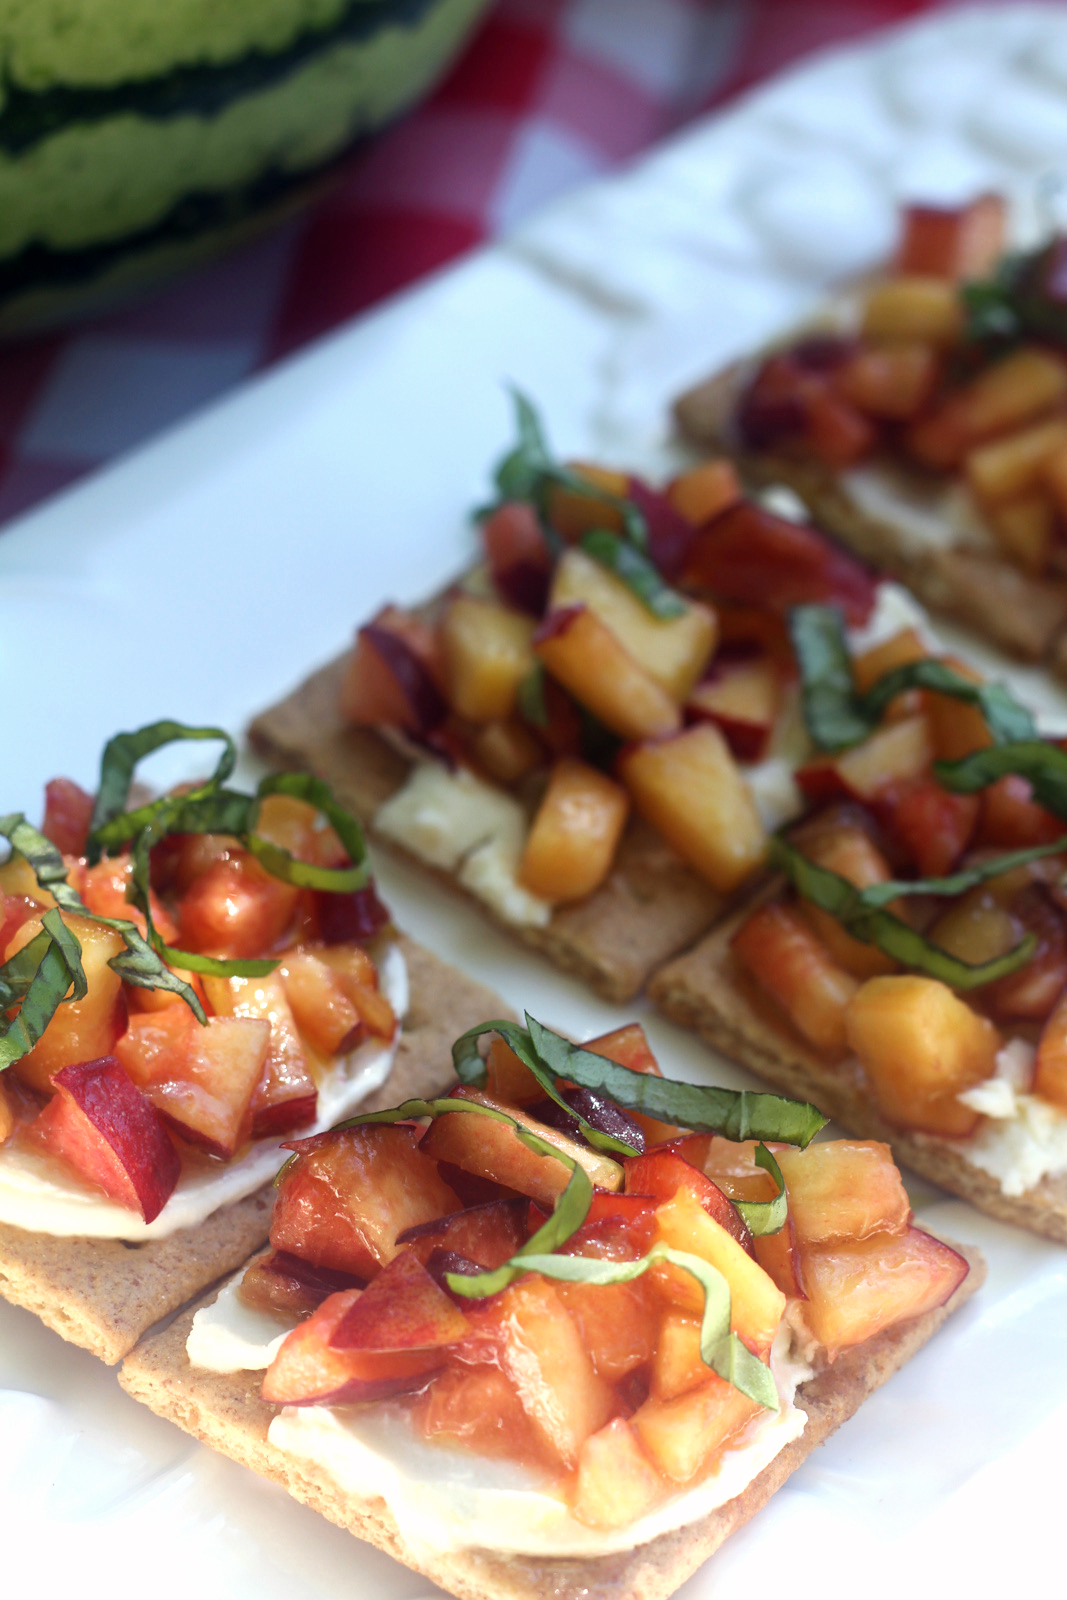 Peach Basil Bruschetta with Goat Cheese | Catch My Party